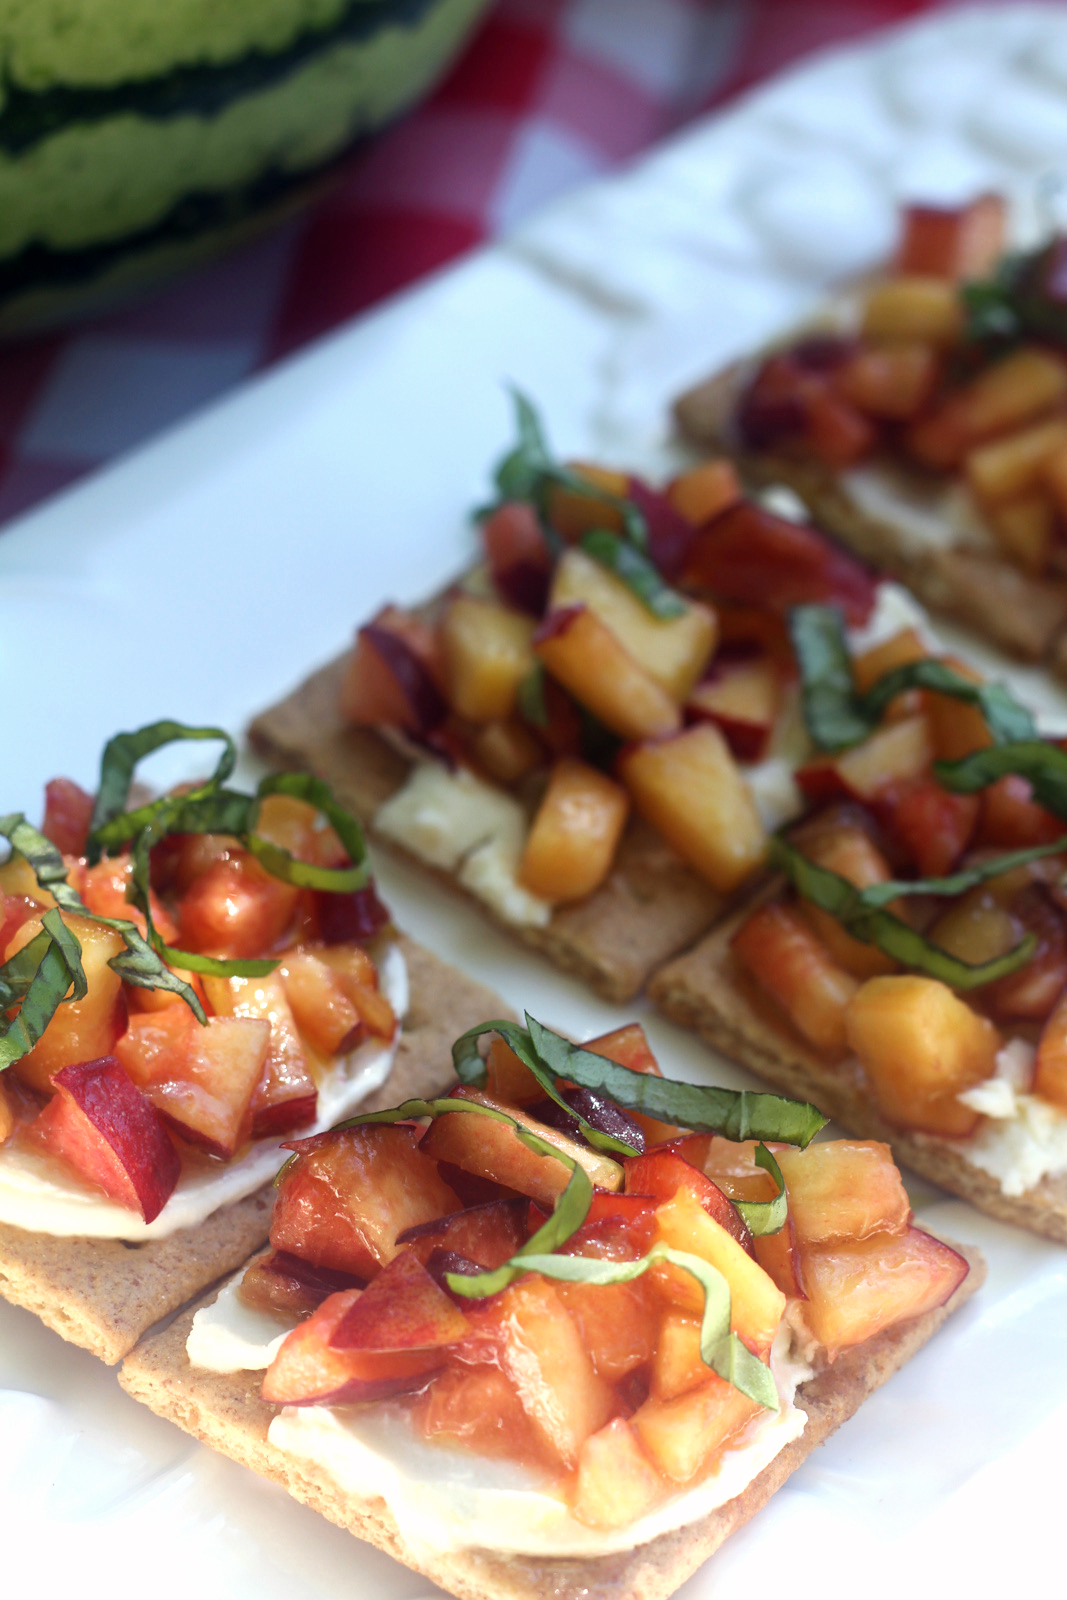 Peach Basil Bruschetta with Goat Cheese | Catch My Party